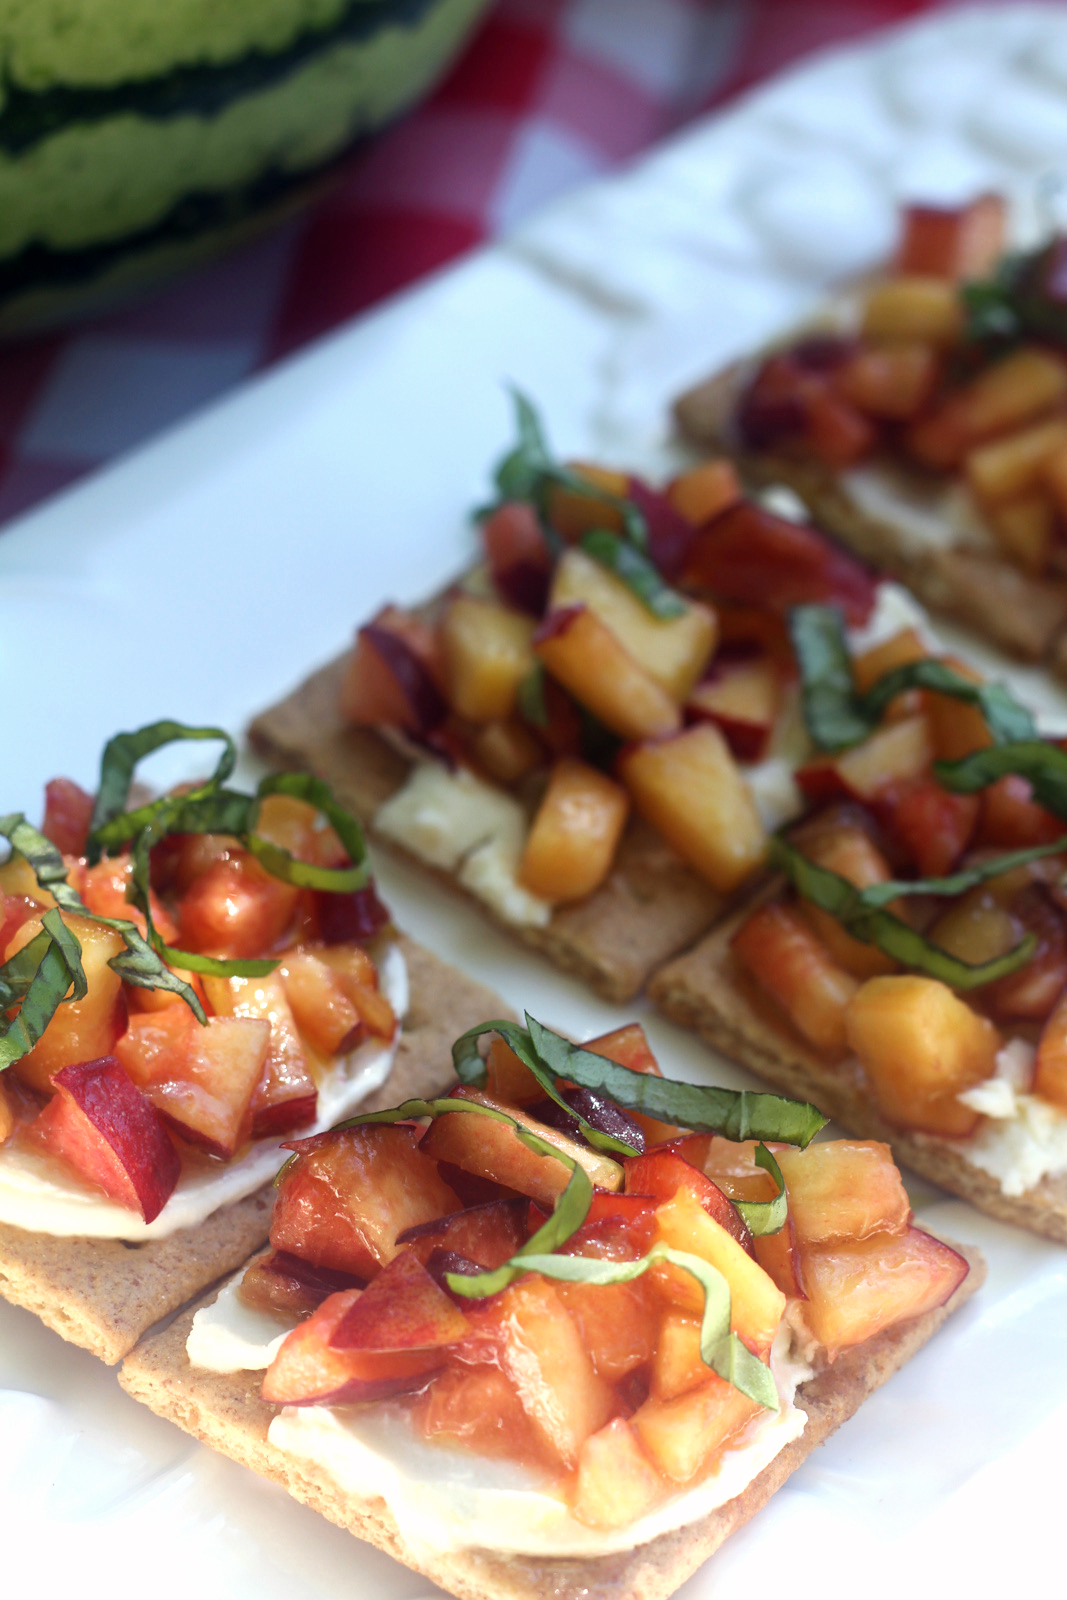 Peach Basil Bruschetta with Goat Cheese | Catch My Party